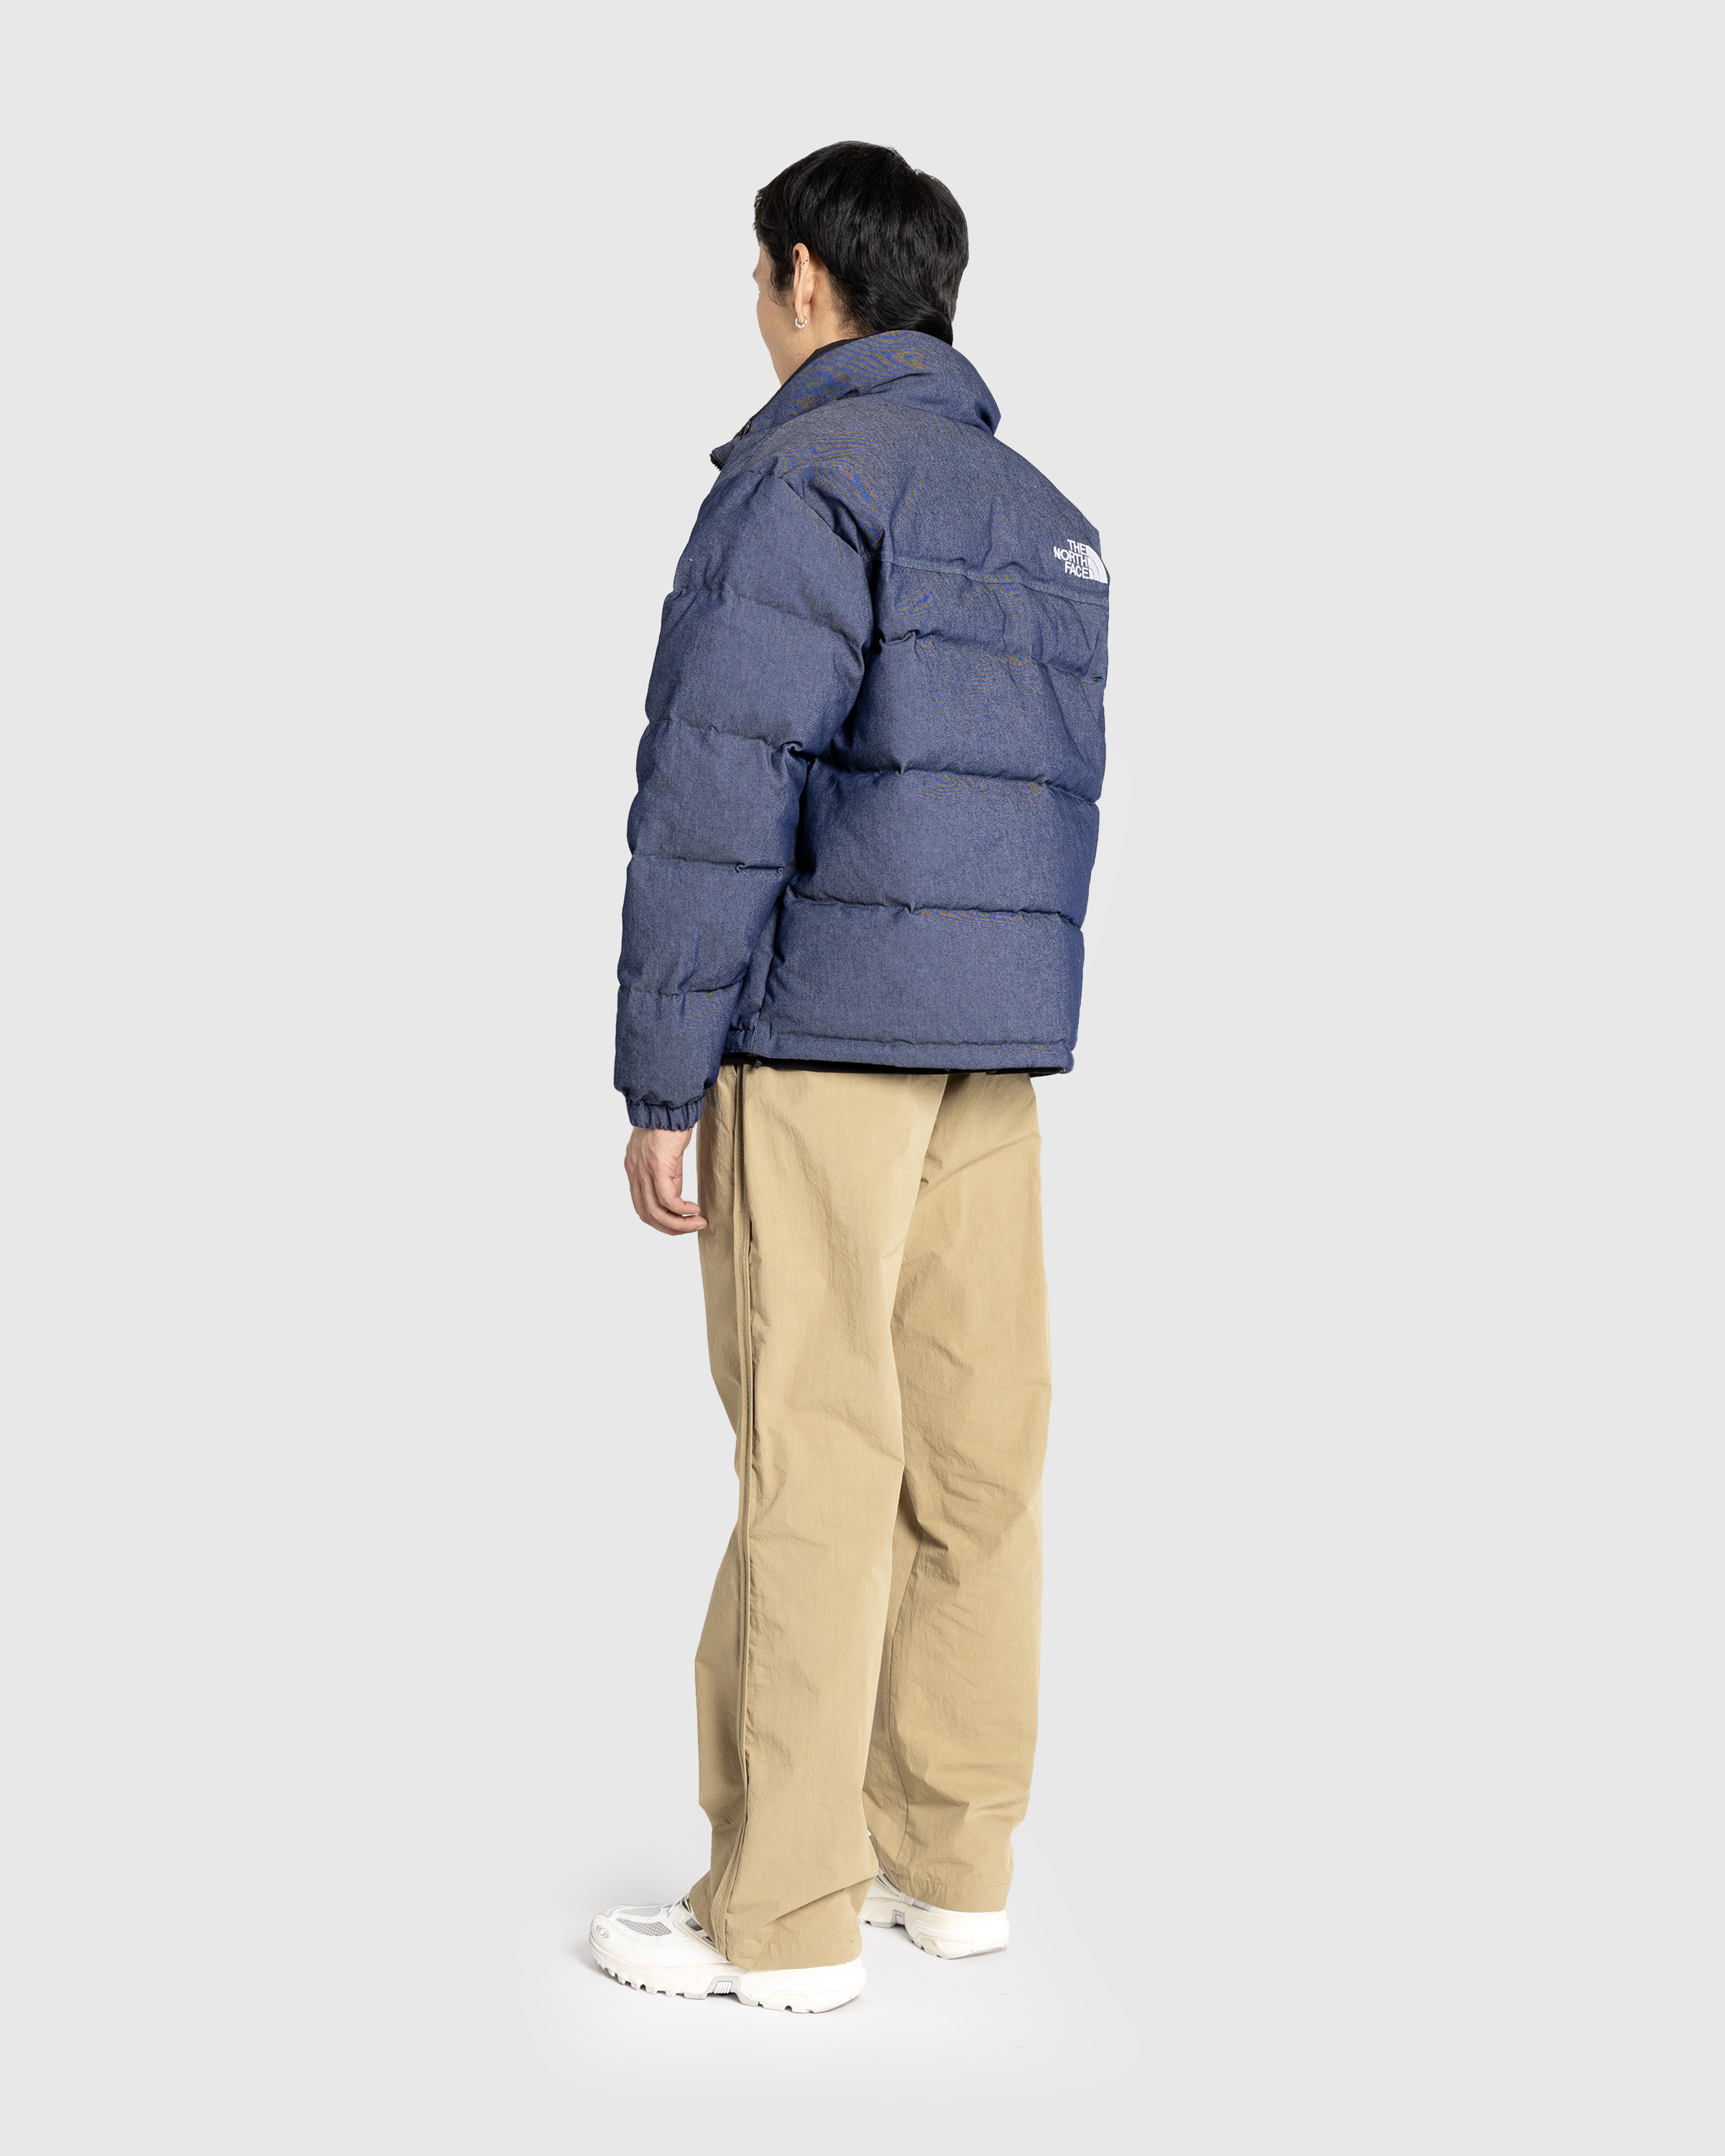 The North Face – ’92 Reversible Nuptse Jacket Sulphur Moss/Coal Brown-2 - Outerwear - Blue - Image 5